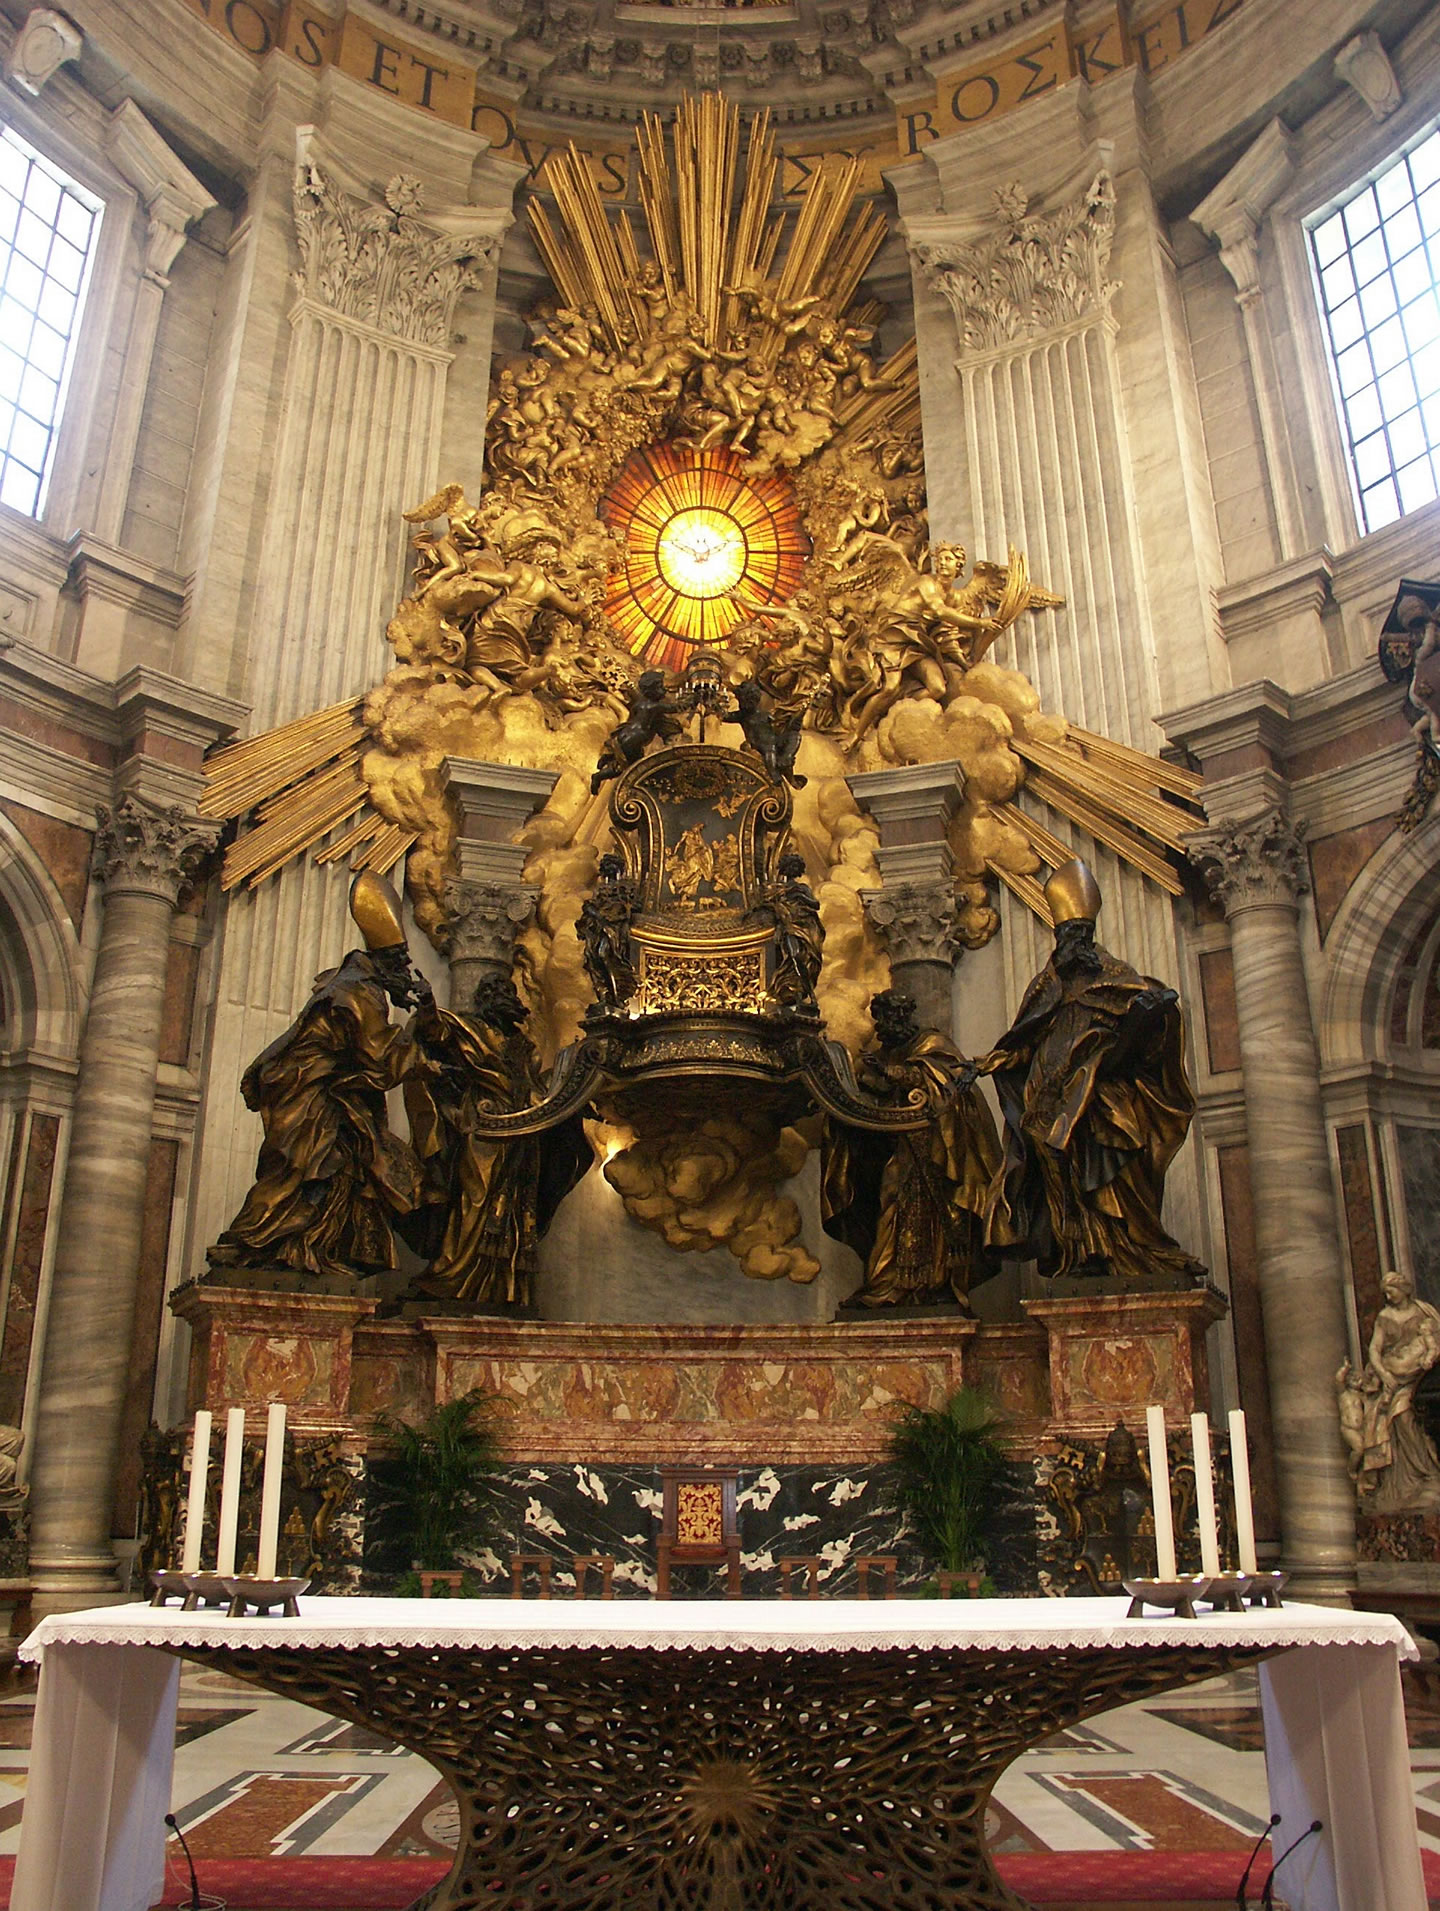 The Chair of St. Peter